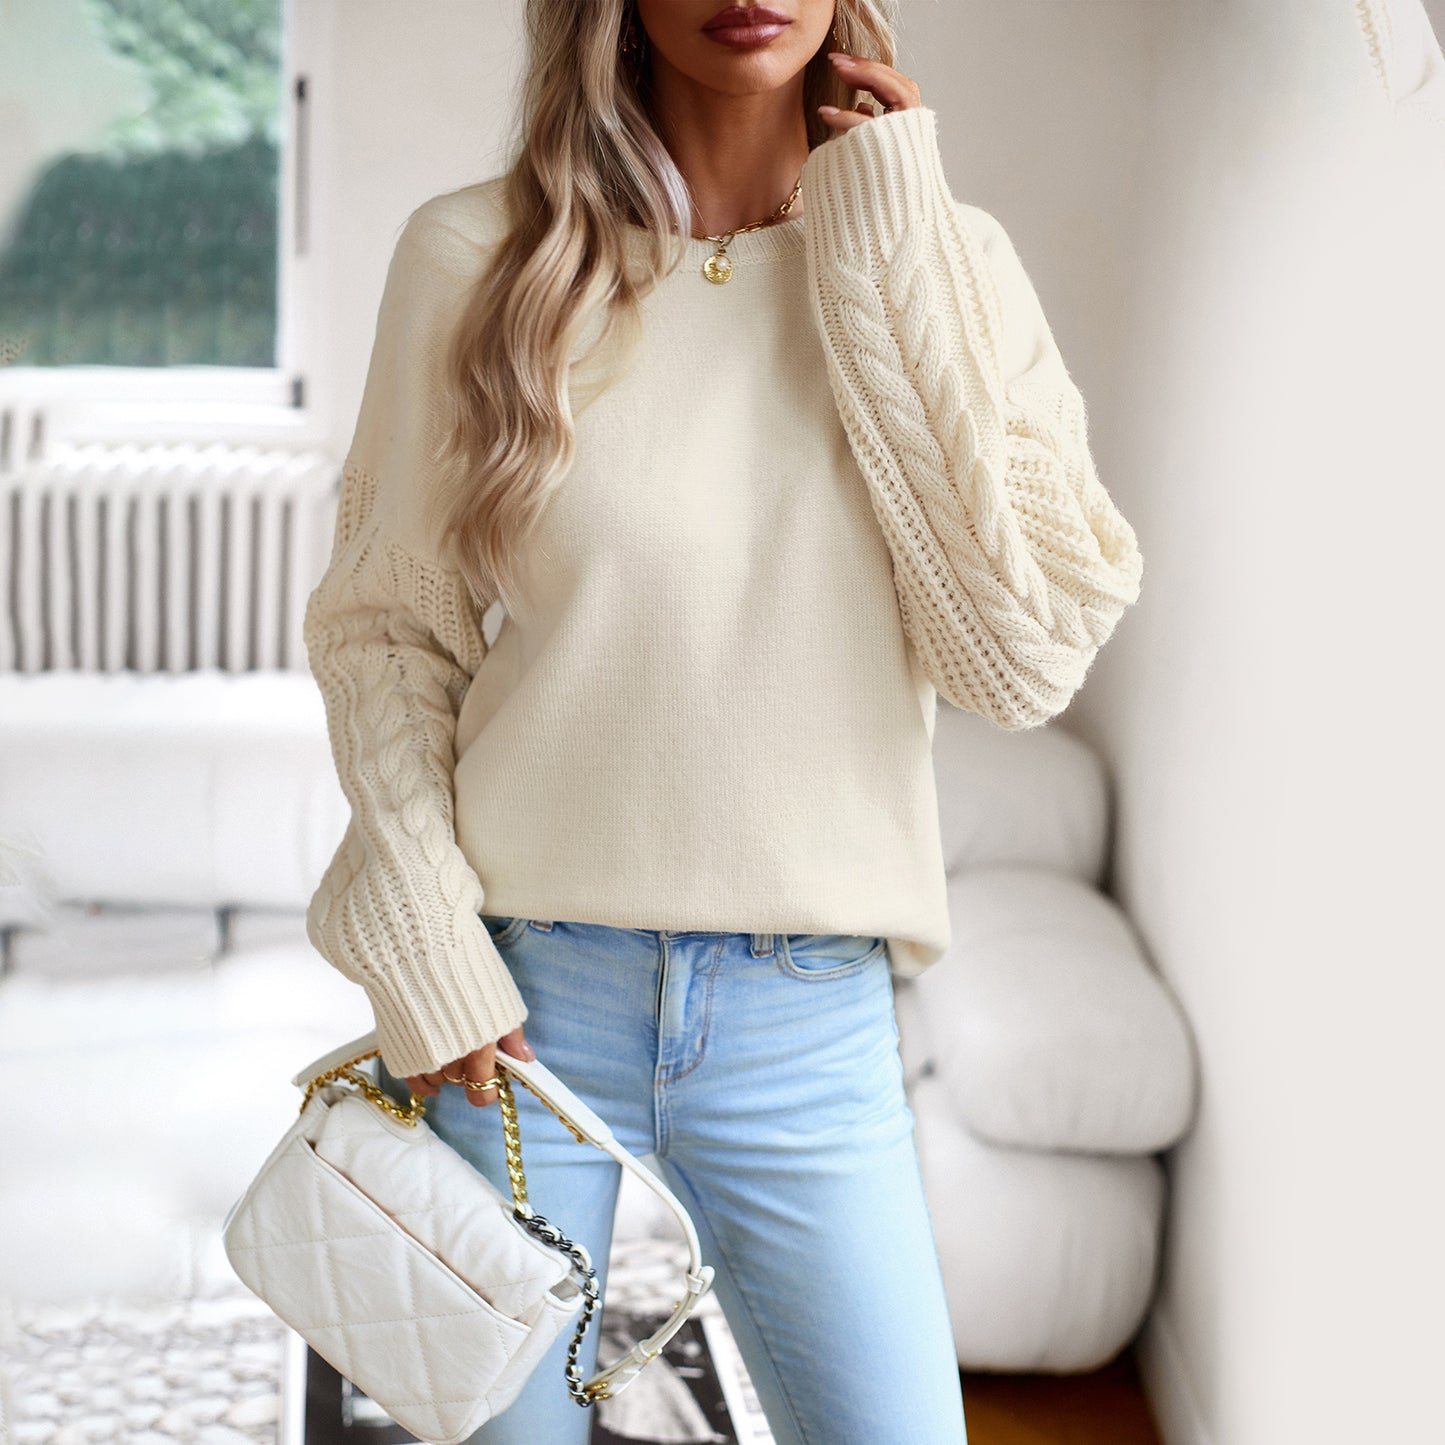 Loritta Womens Long Sleeve Round Collar Crewneck Sweater Knitted Pullover